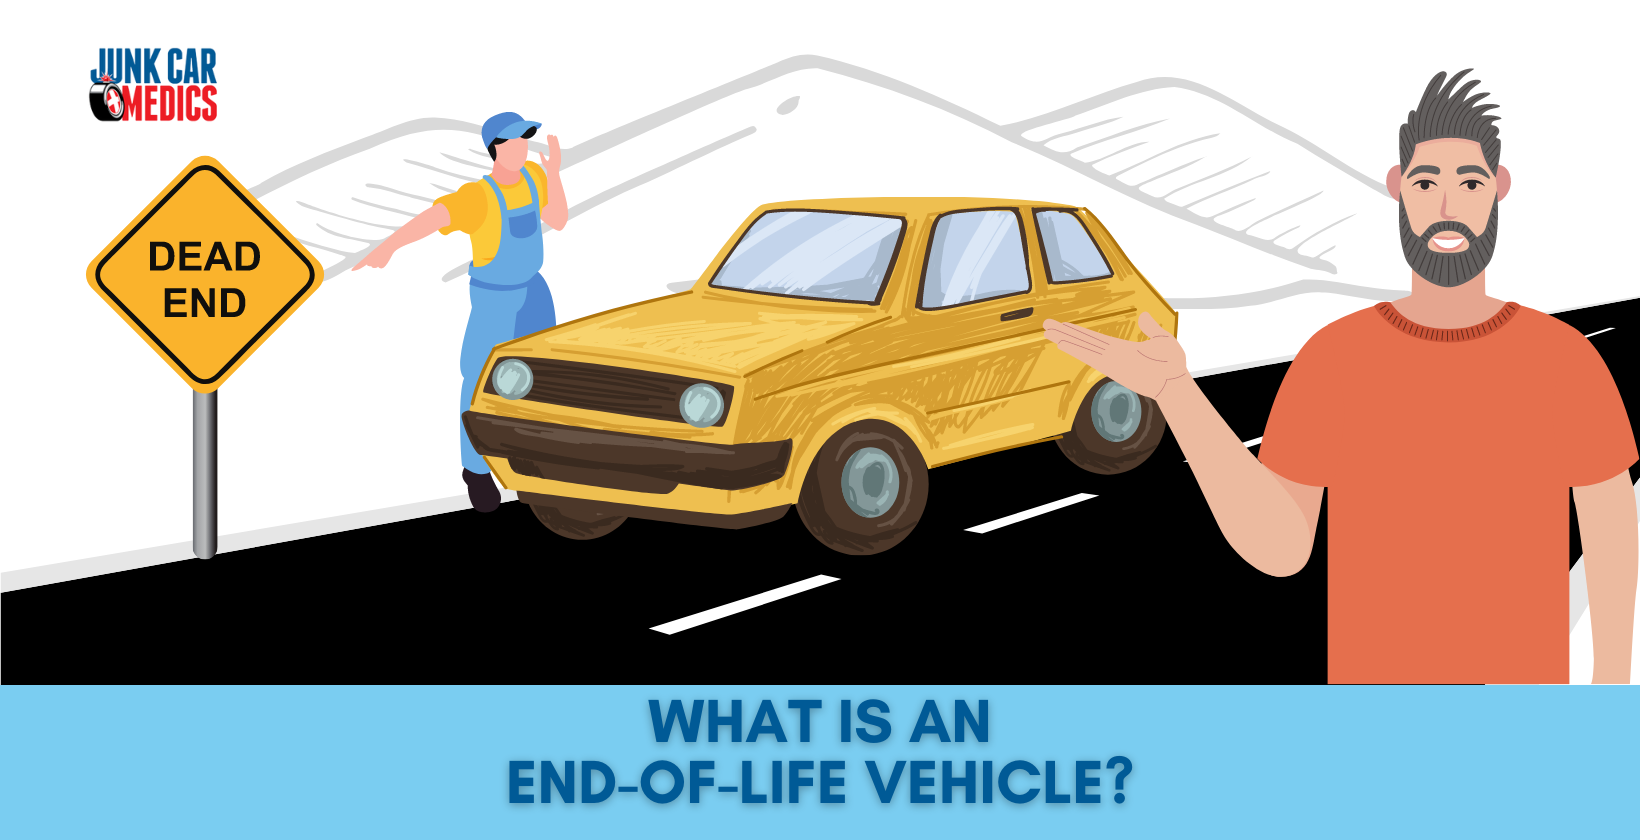 What is an End-of-Life Vehicle?